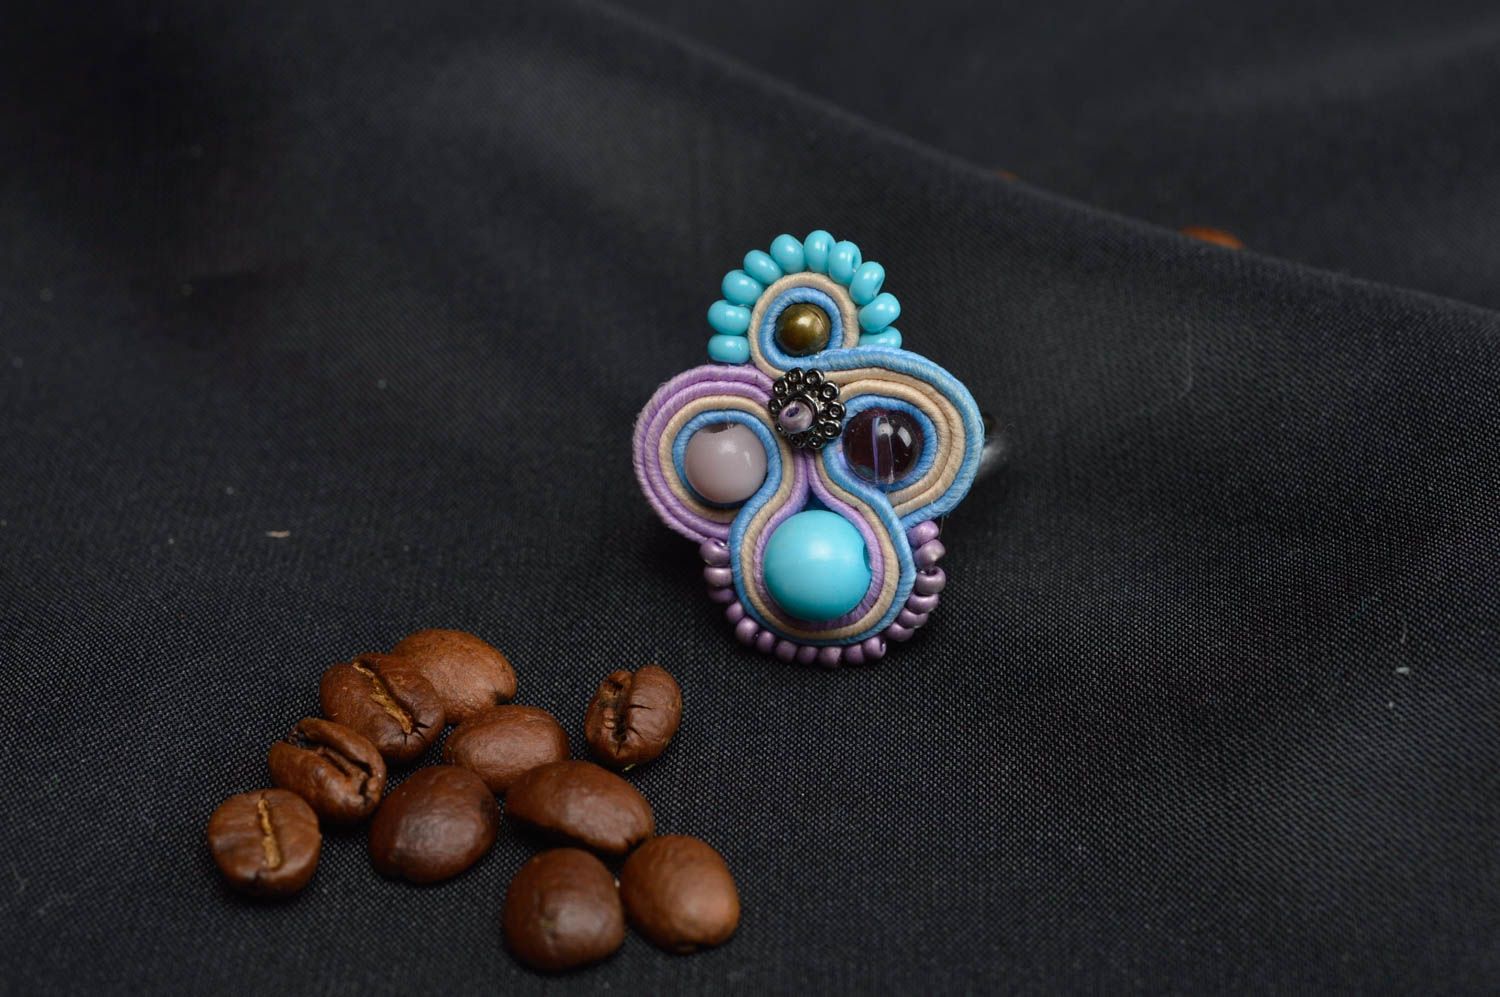 Fashion ring handmade soutache jewelry rings for women designer accessories photo 1